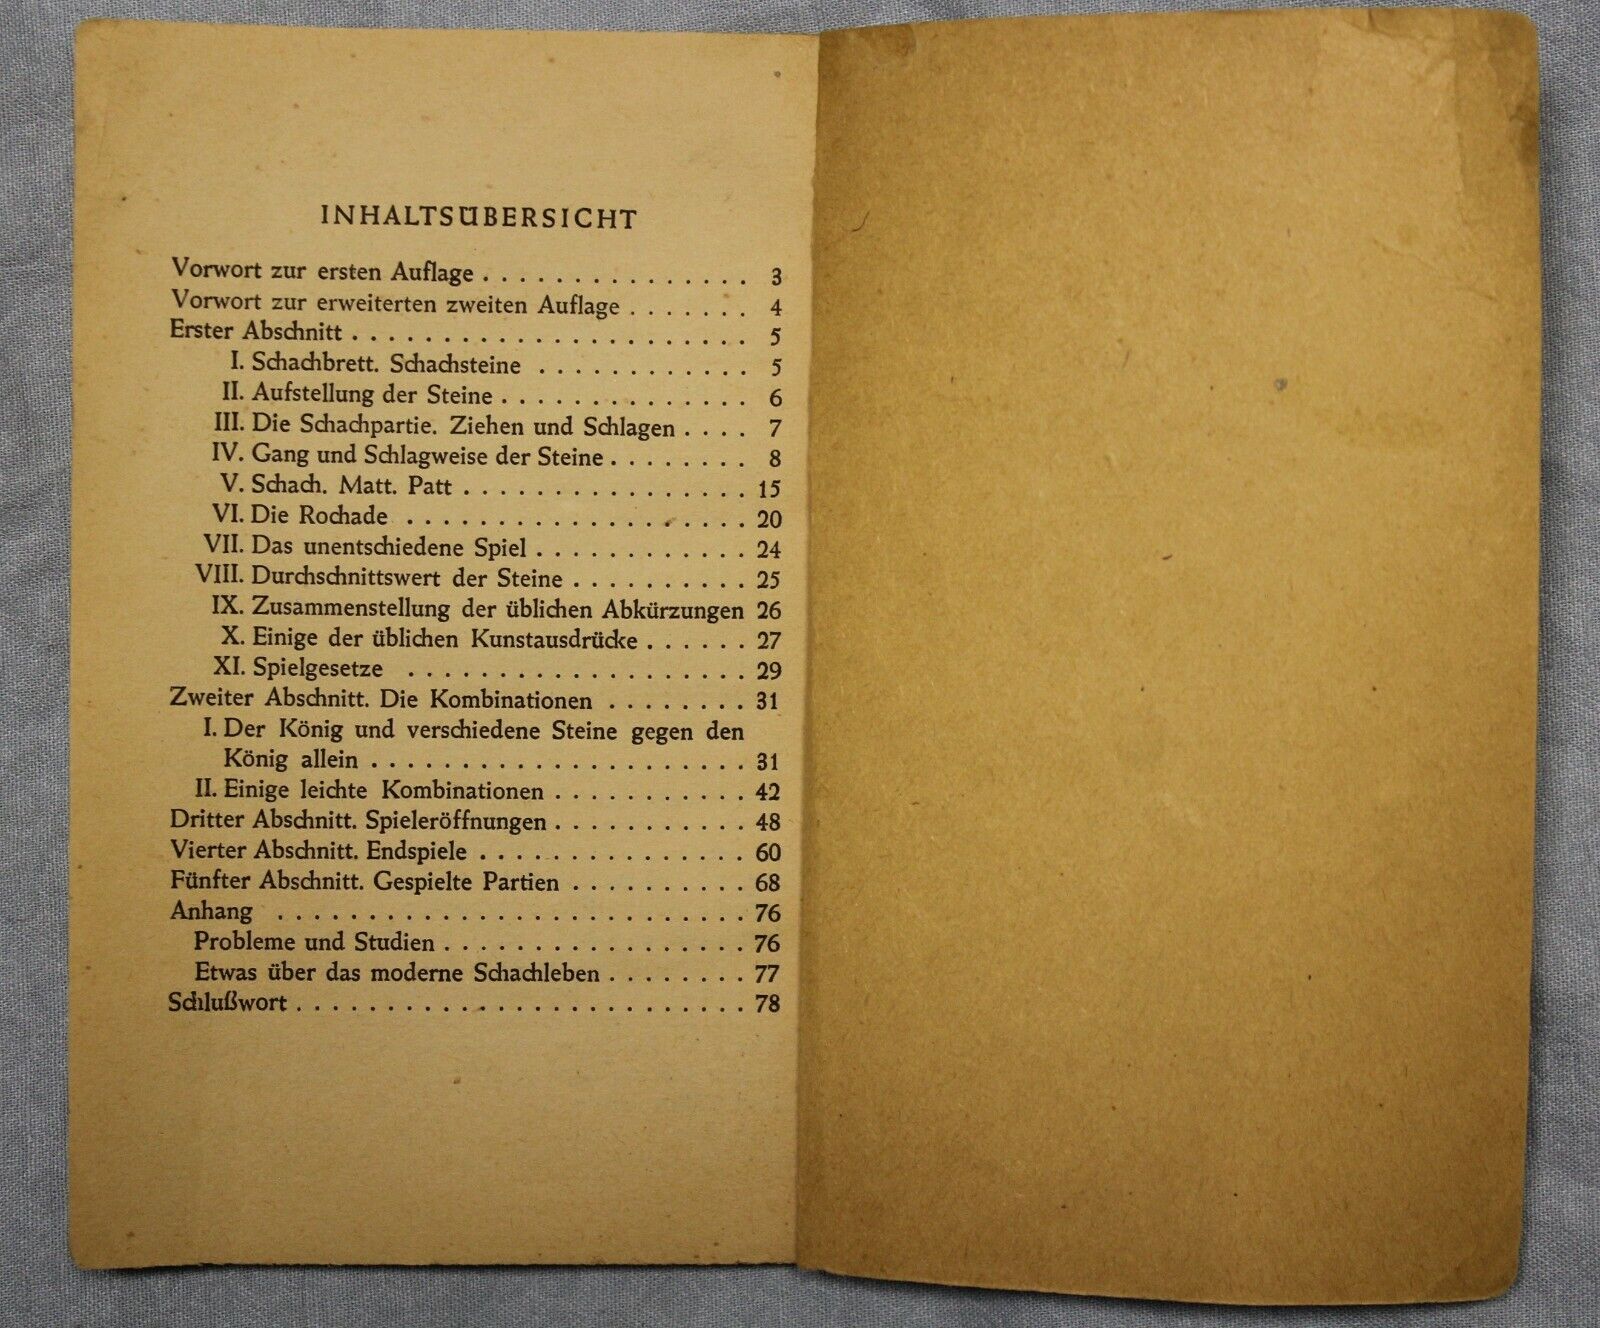 11110.Chess Book: Schach, Brief introduction to its rules and subtleties, Mieses, 1933